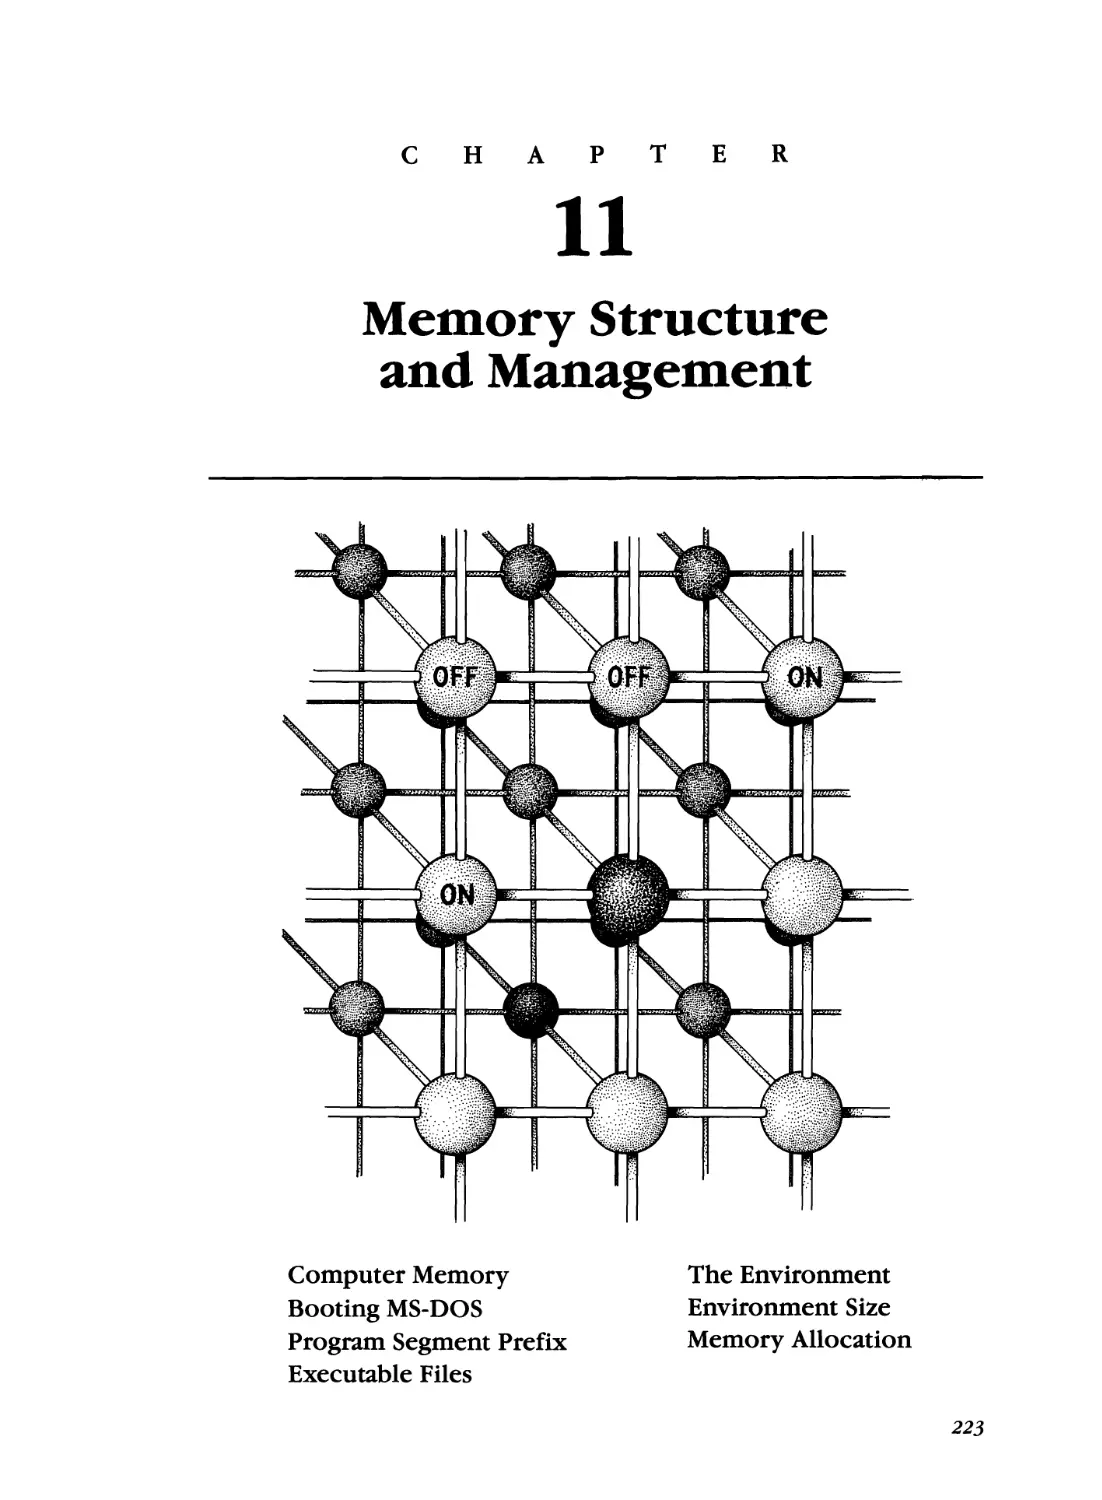 Chapter 11 - Memory Structure and Management